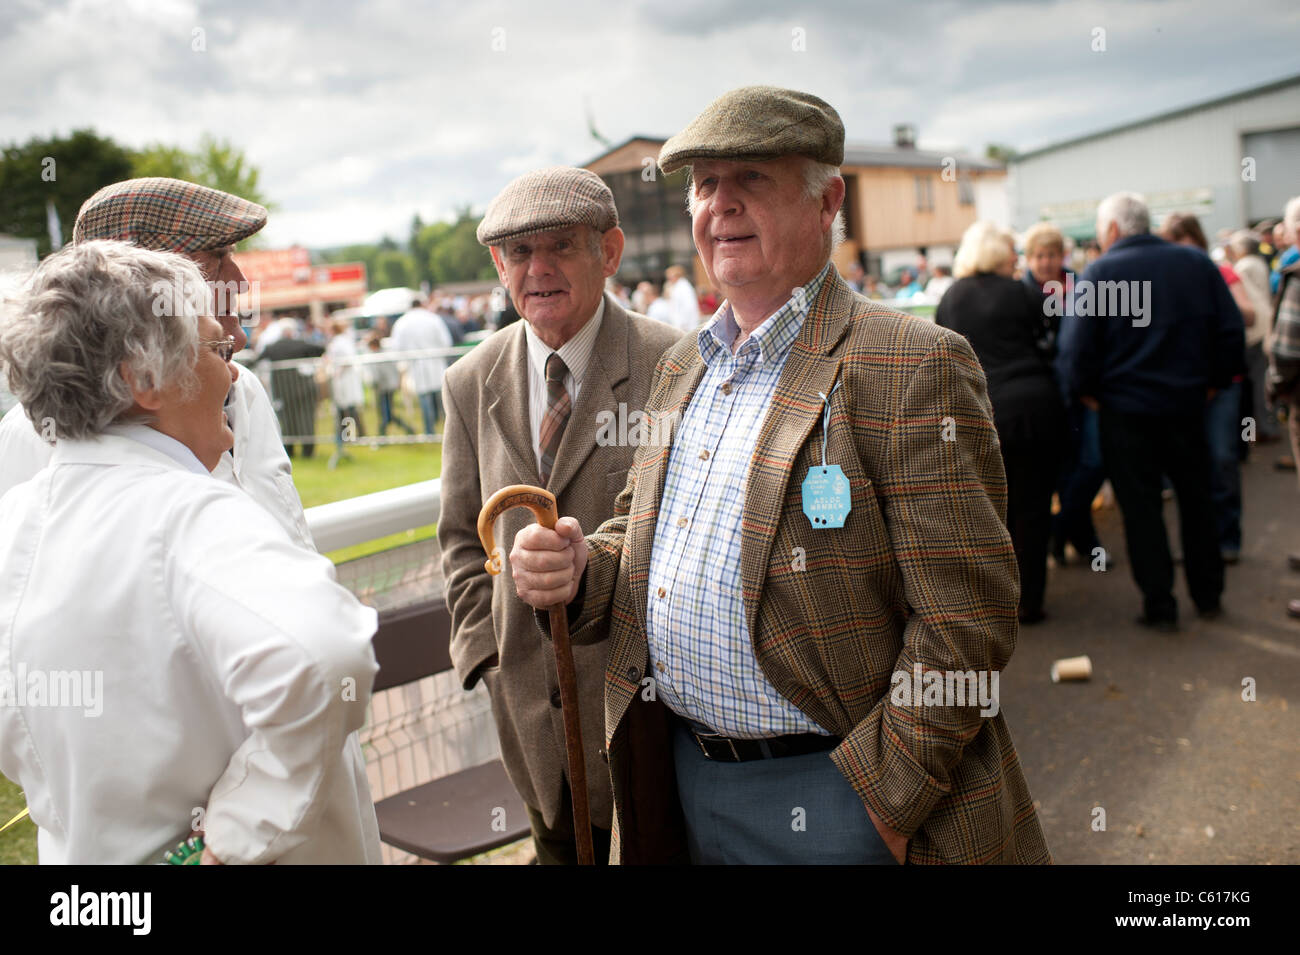 Farmers at the Royal Welsh Agricultural Show, Builth Wells, Wales, 2011 Stock Photo